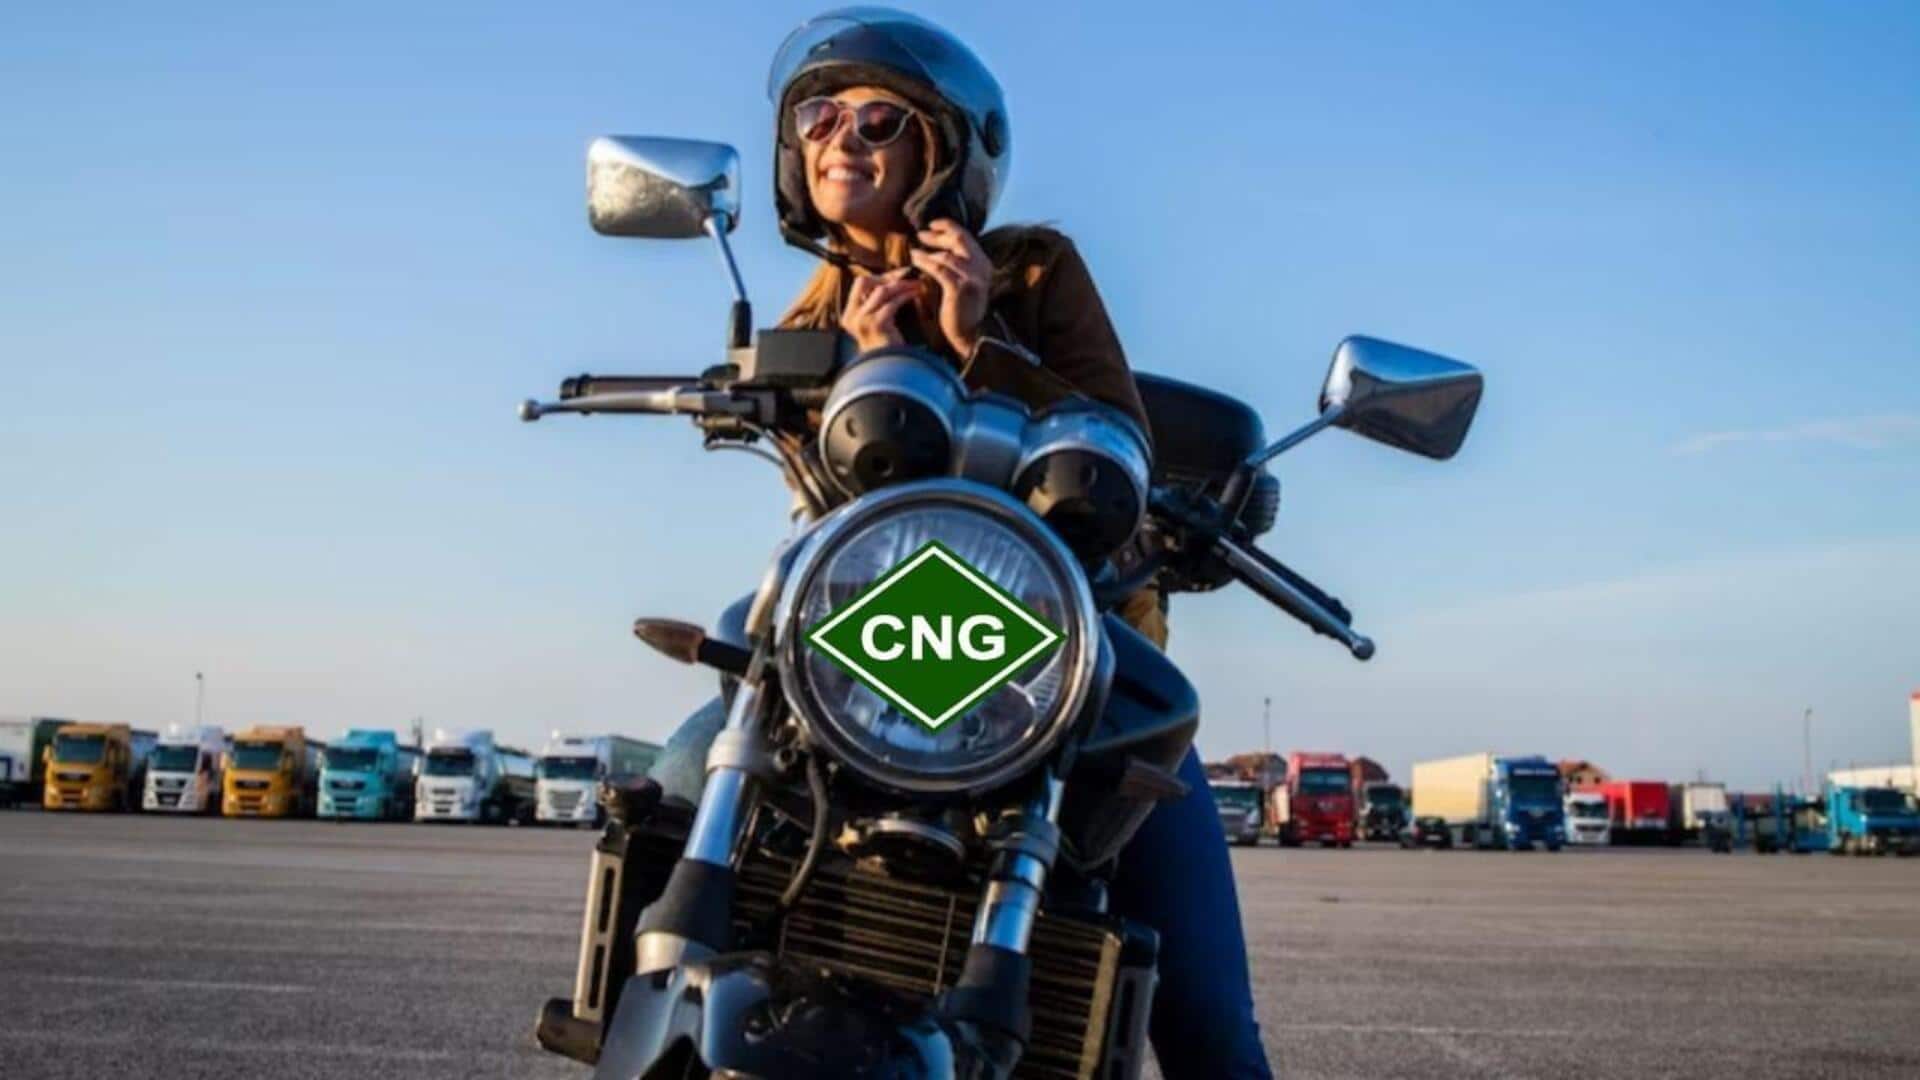 World's first CNG bike debuts tomorrow: What to expect